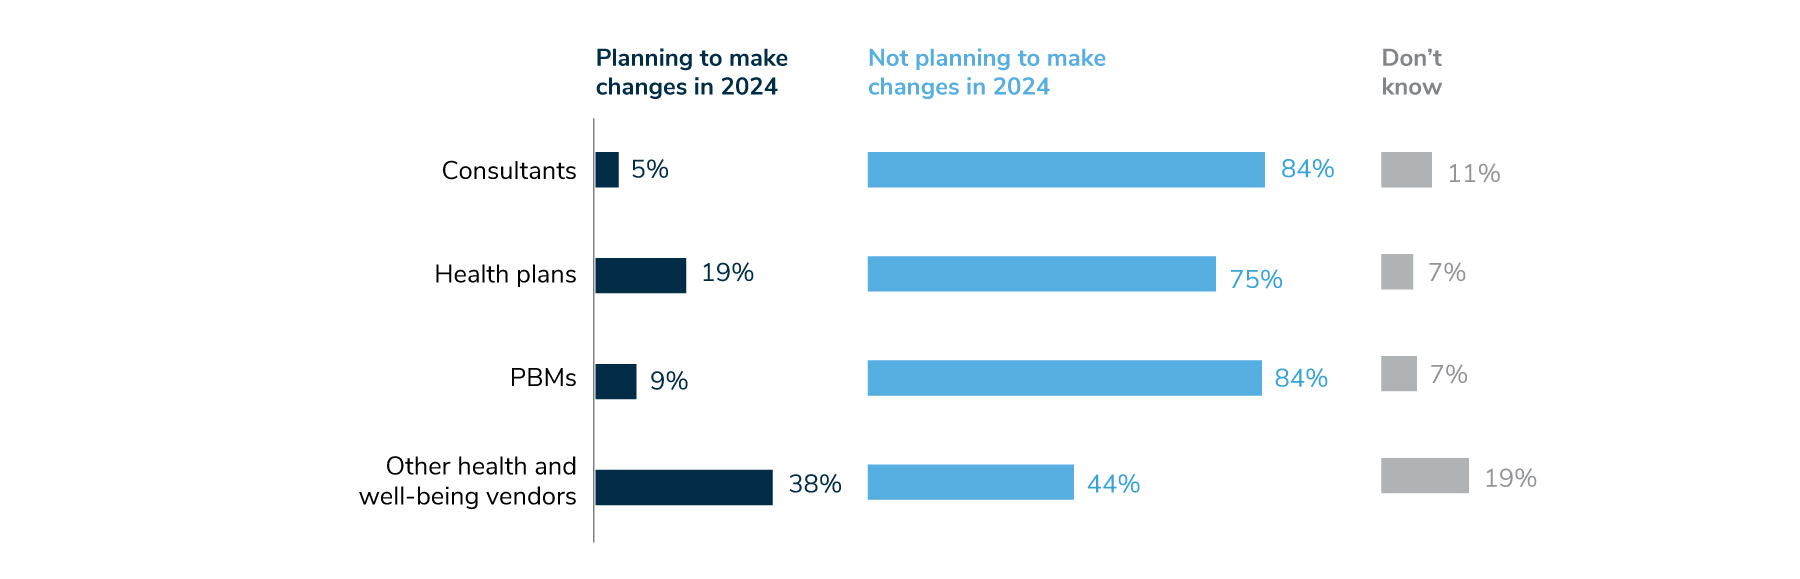 Most employers are not planning to seek any changes in their partnerships for 2024. However, 38% are planning to make a change with their health and well-being vendors. 19% are planning to make a change with their health plans. 9% are planning to make a change with their PBMs. 5% are planning to make a change with their consultants.